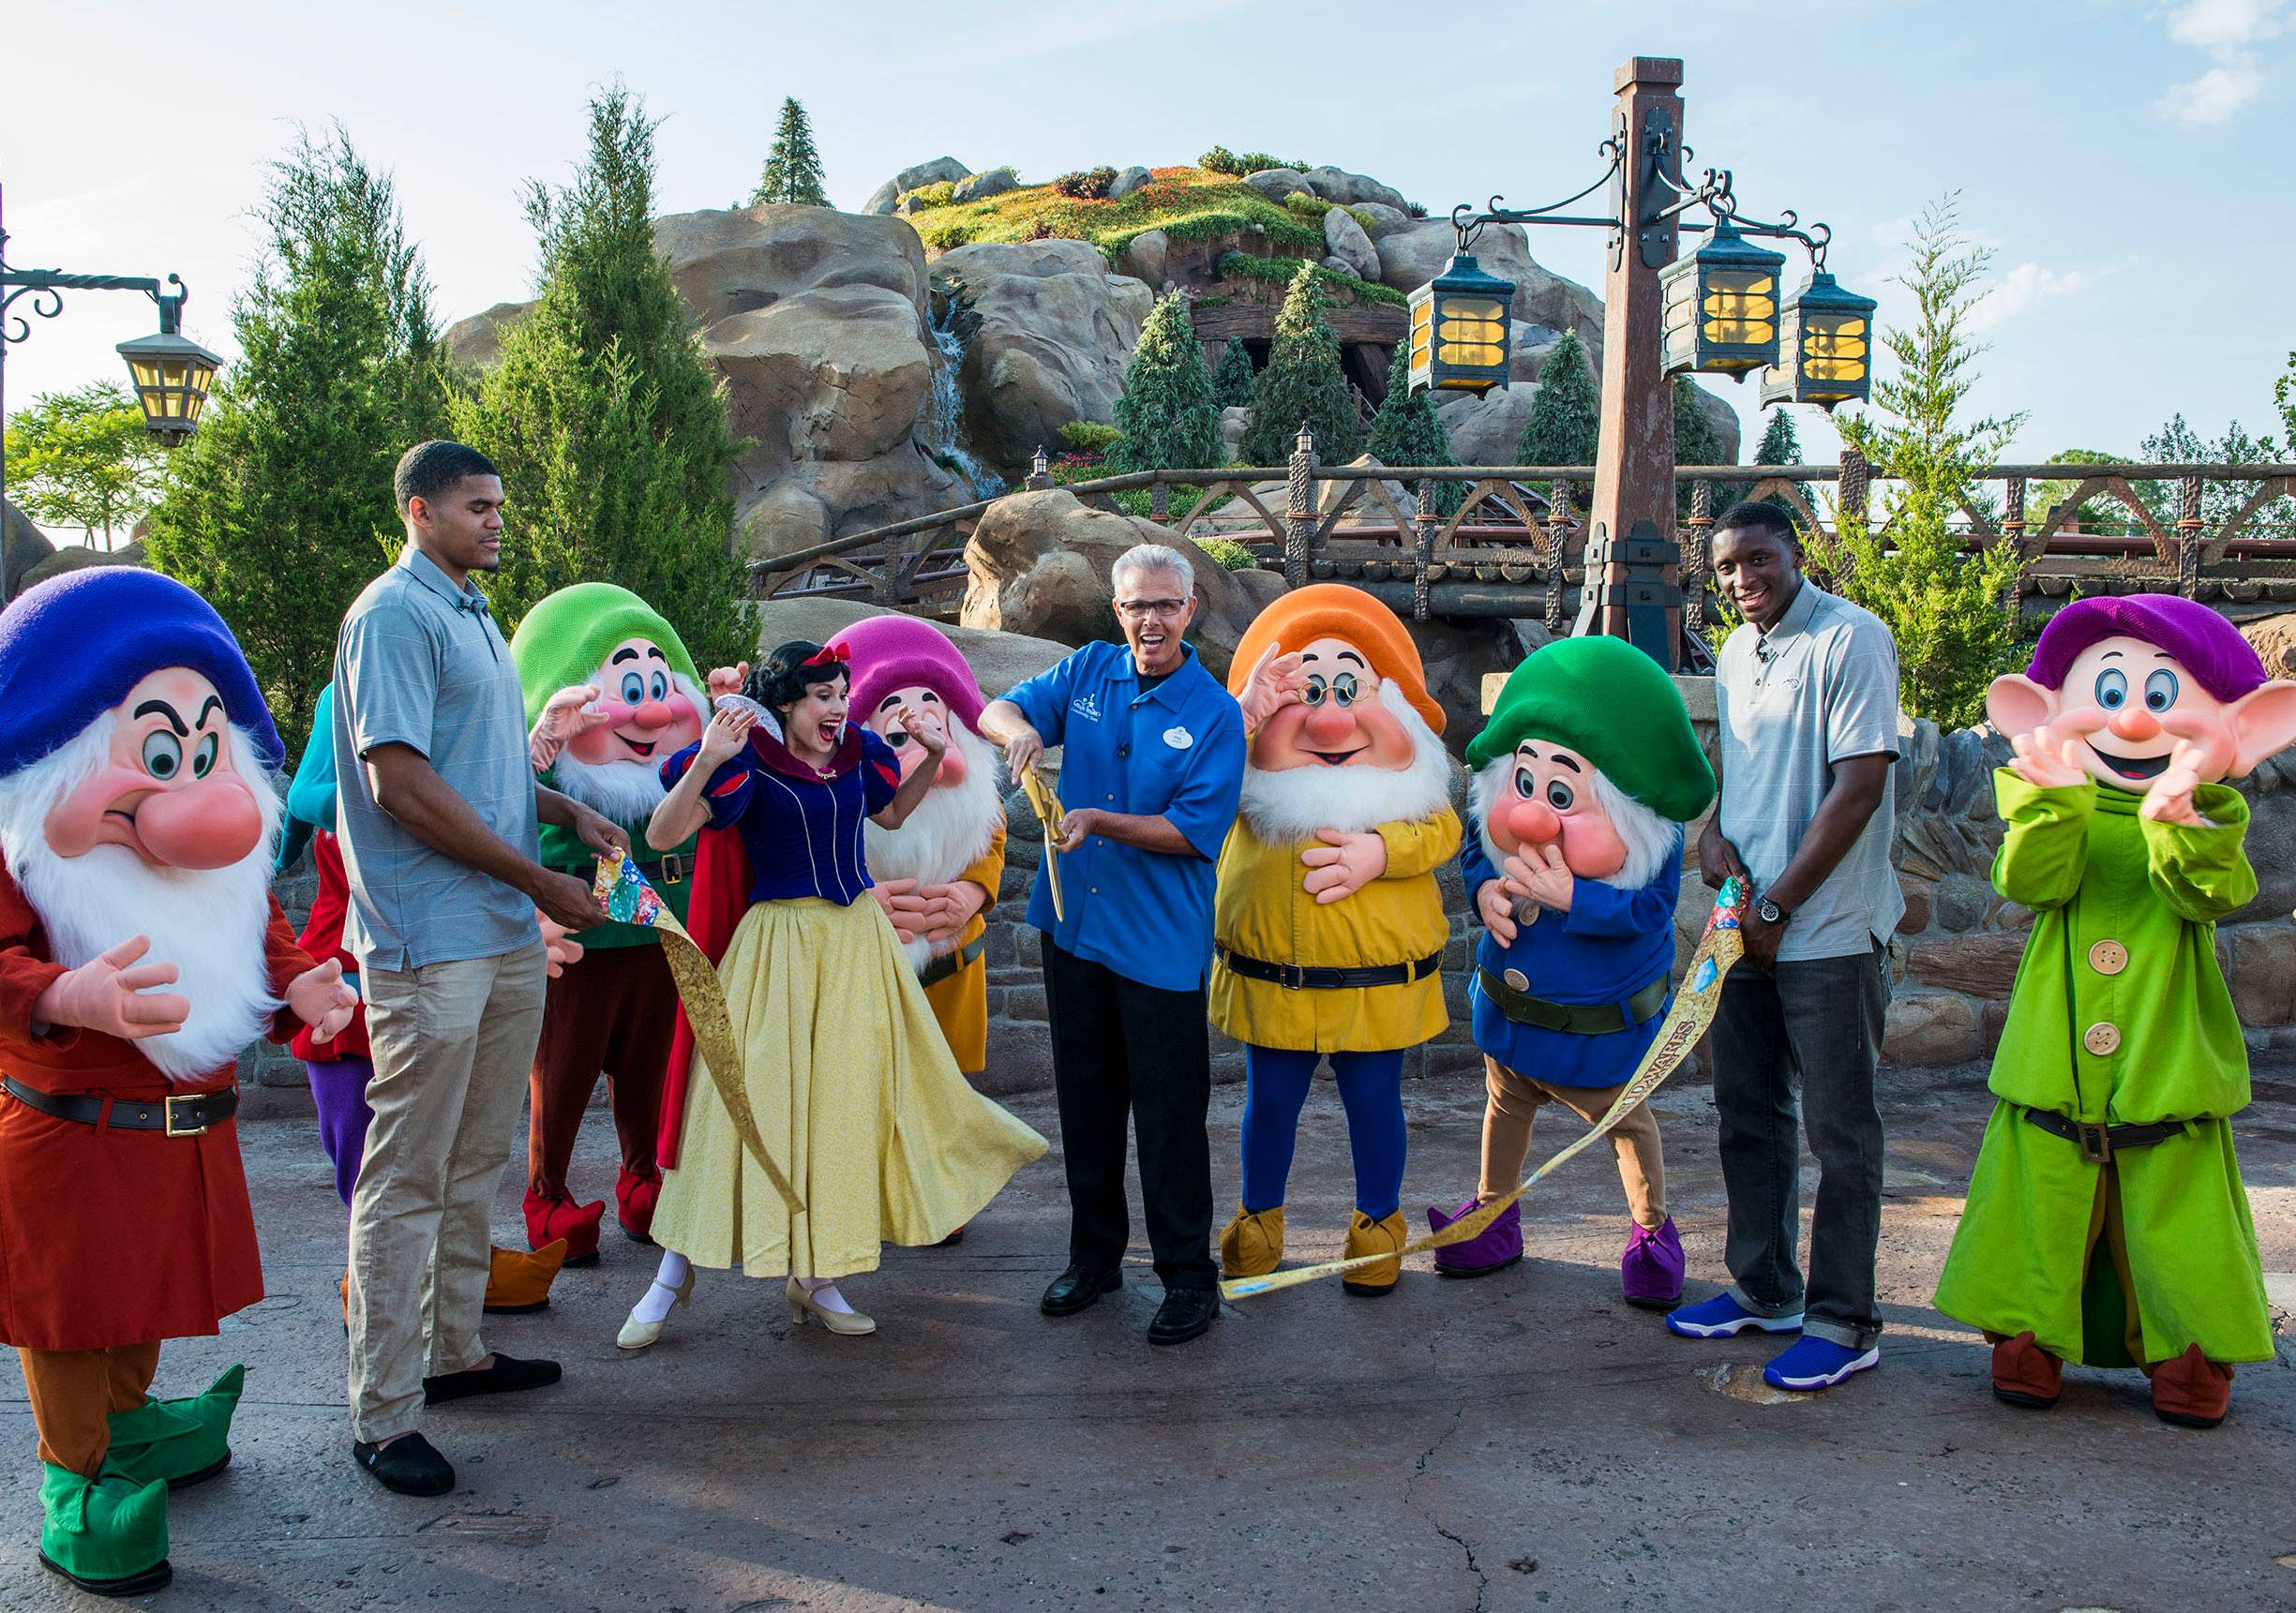 Snow White and the Seven Dwarfs join Phil Holmes (center), vice president of Magic Kingdom Park, and Orlando Magic players Tobias Harris (left) and Victor Oladipo (right)